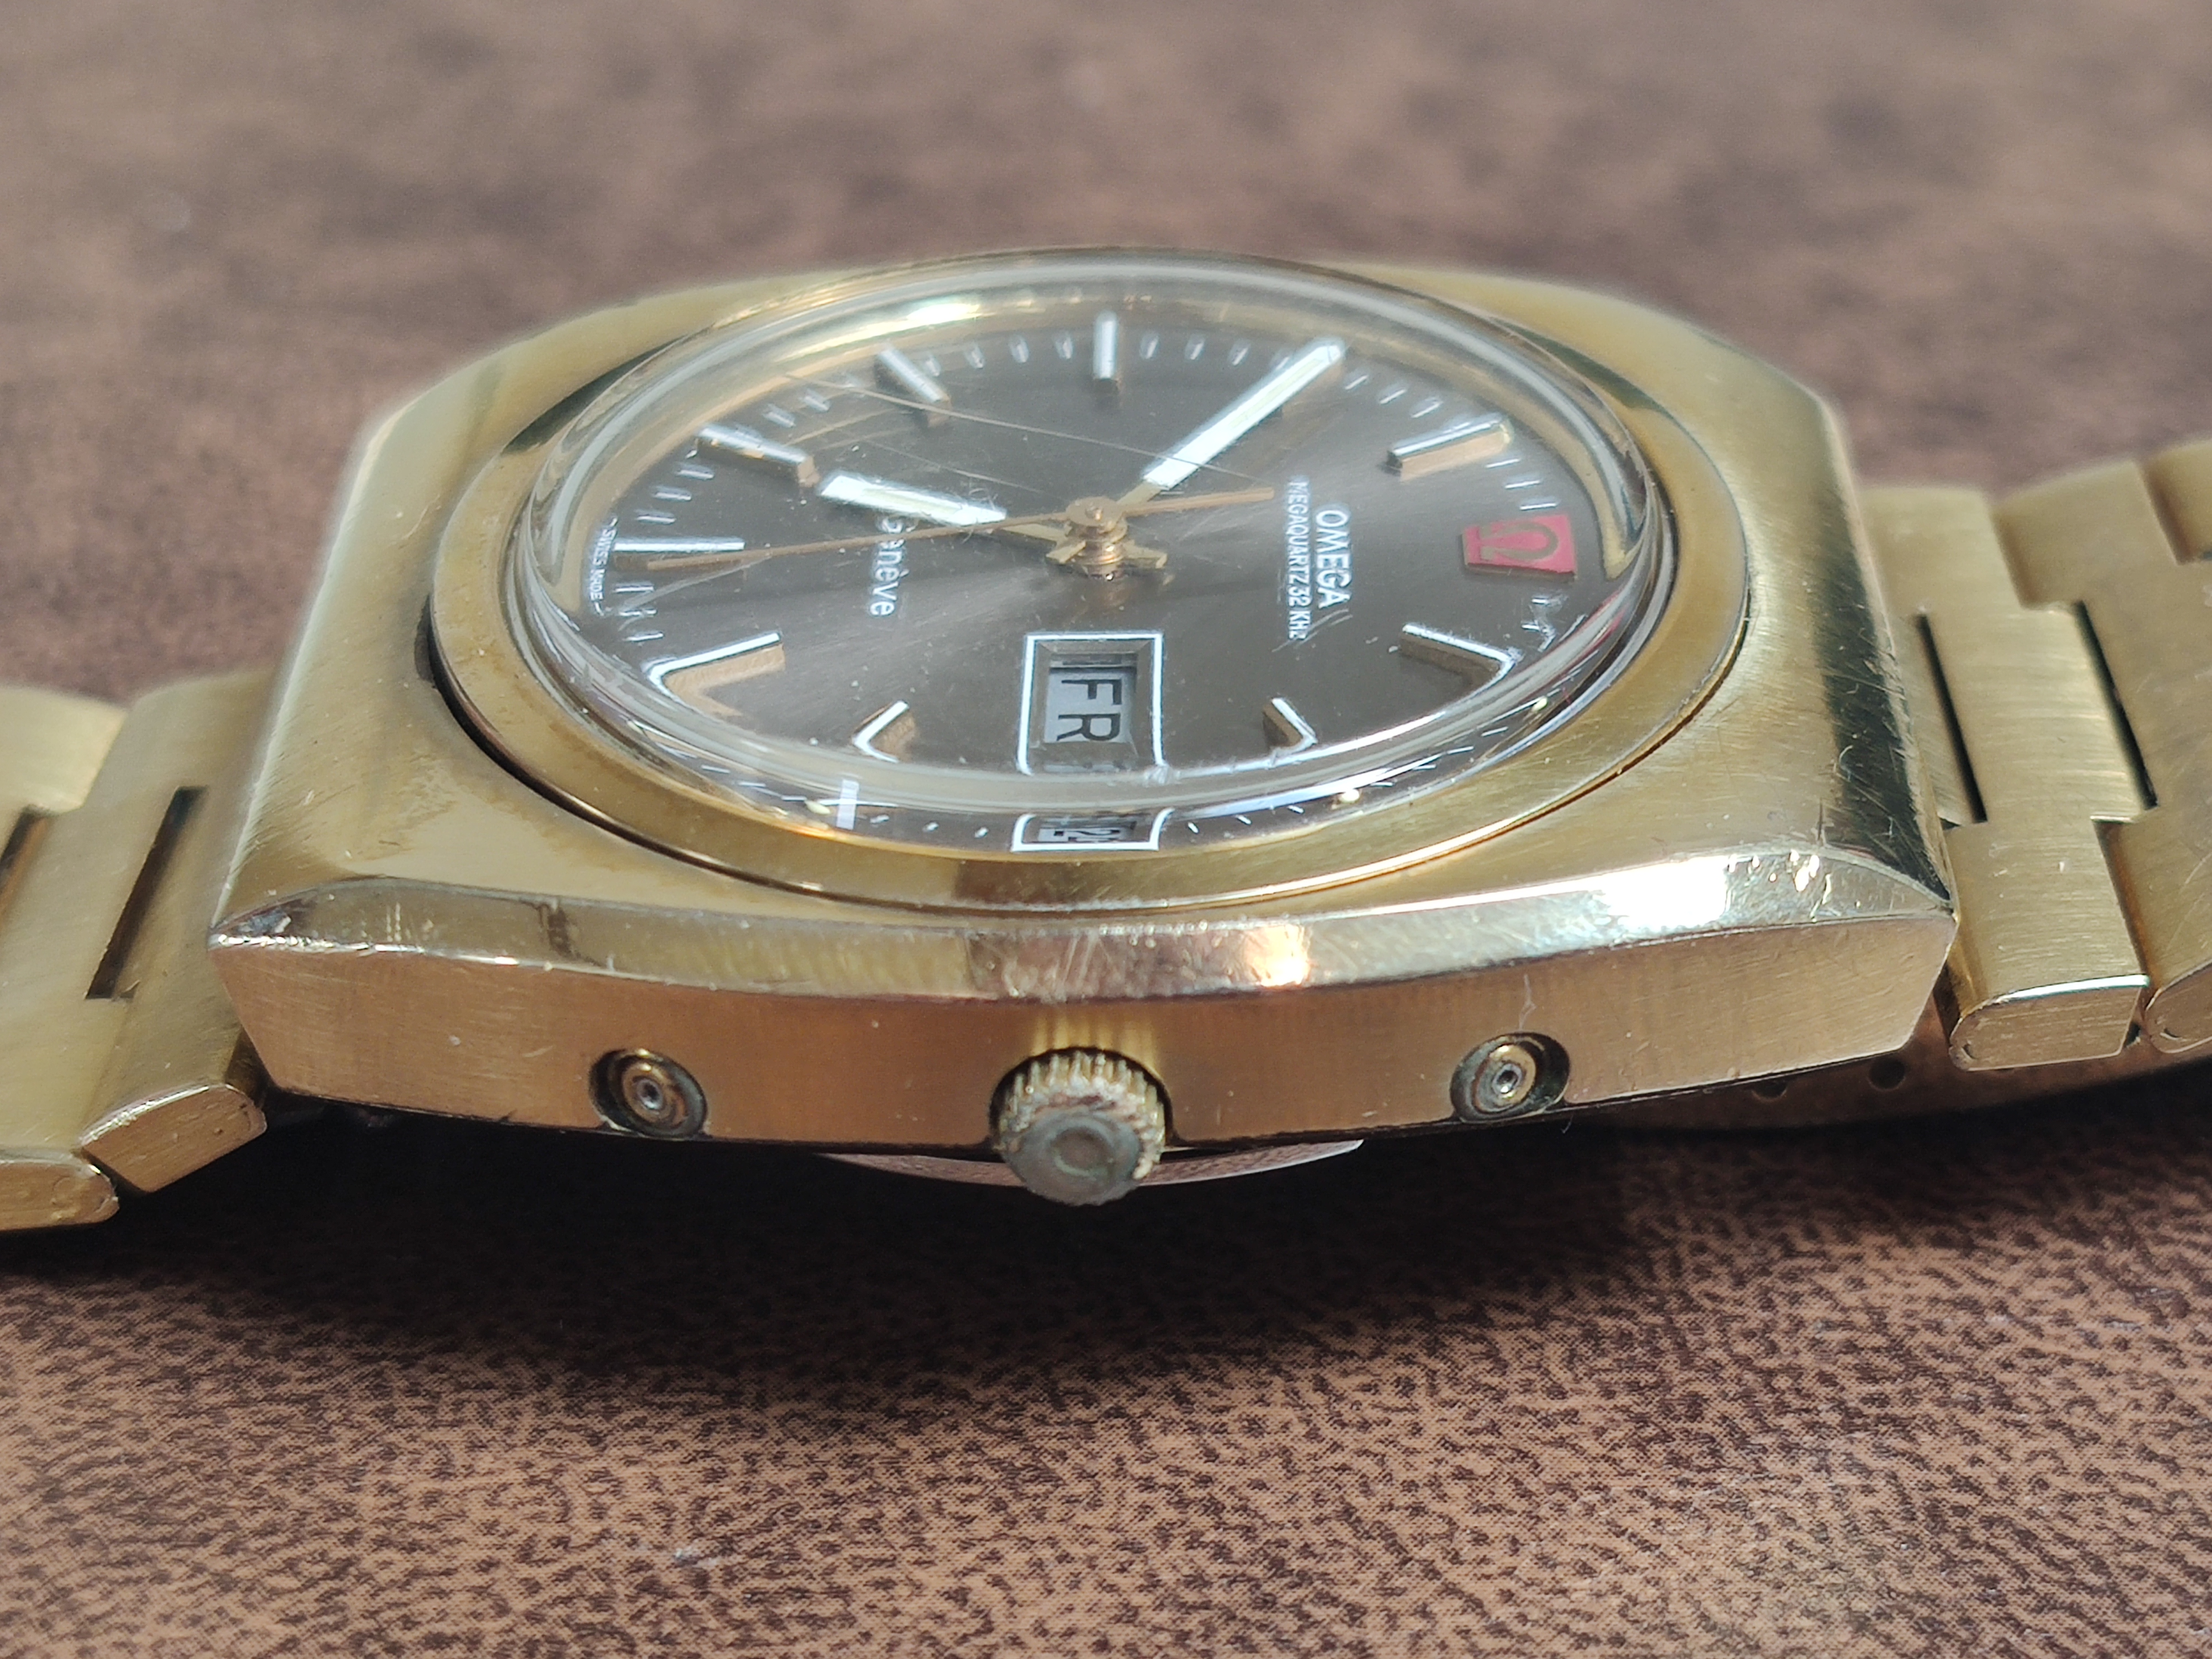 Omega Megaquartz 32 Gentlemans Watch Circa 1974 With Very Rare Gold plated Omega Strap. - Image 6 of 8